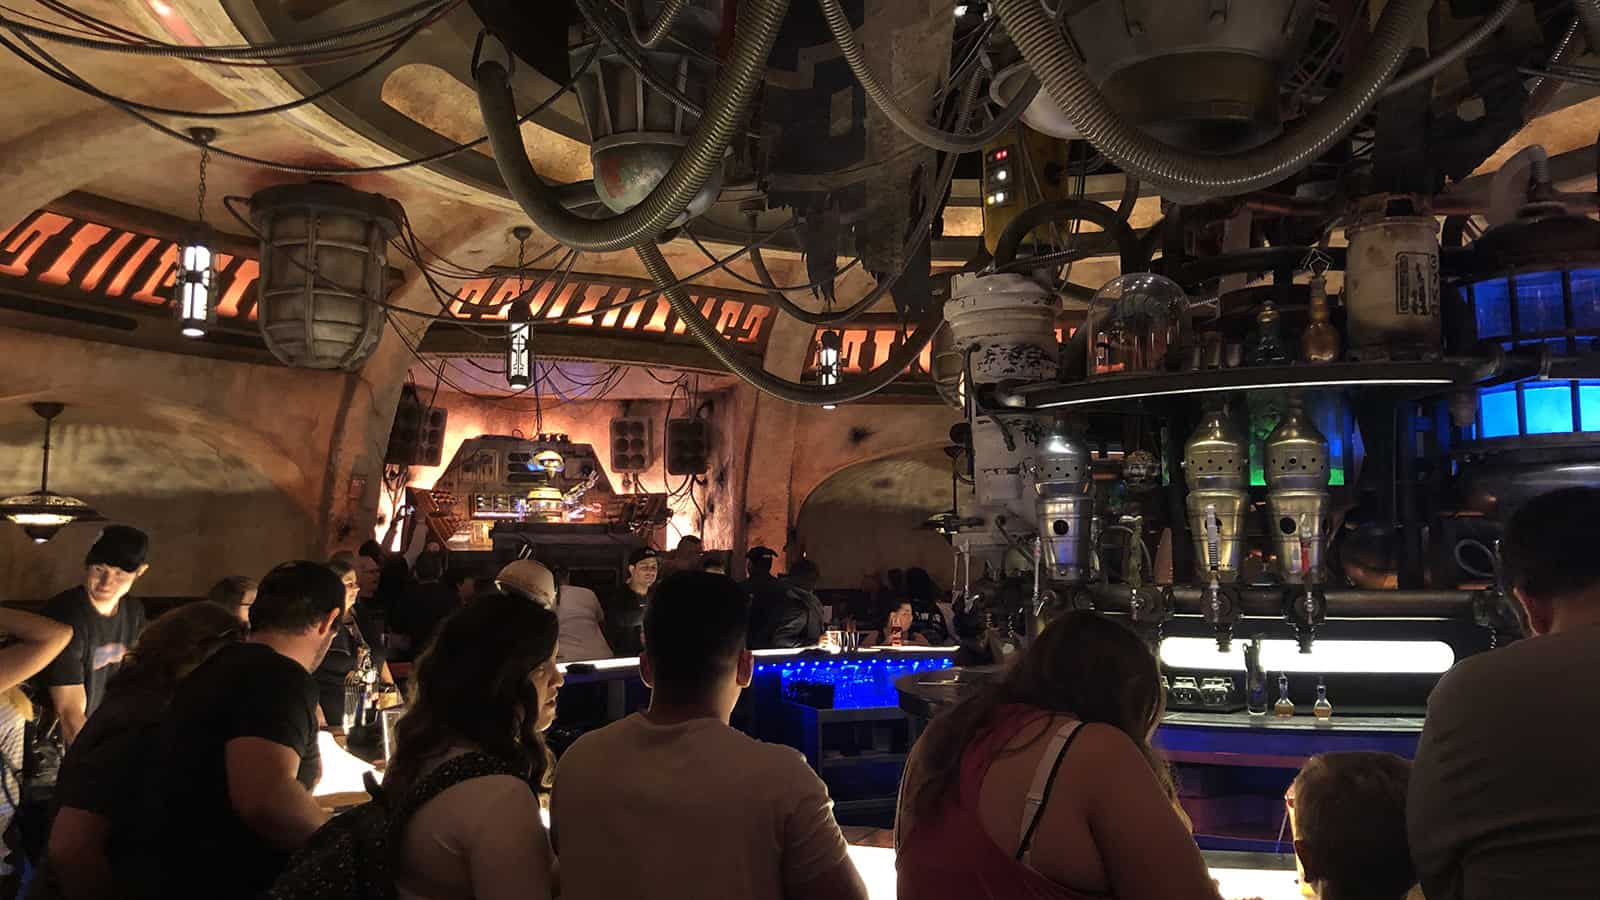 Oga's Cantina in Star Wars Land: worth the hype?